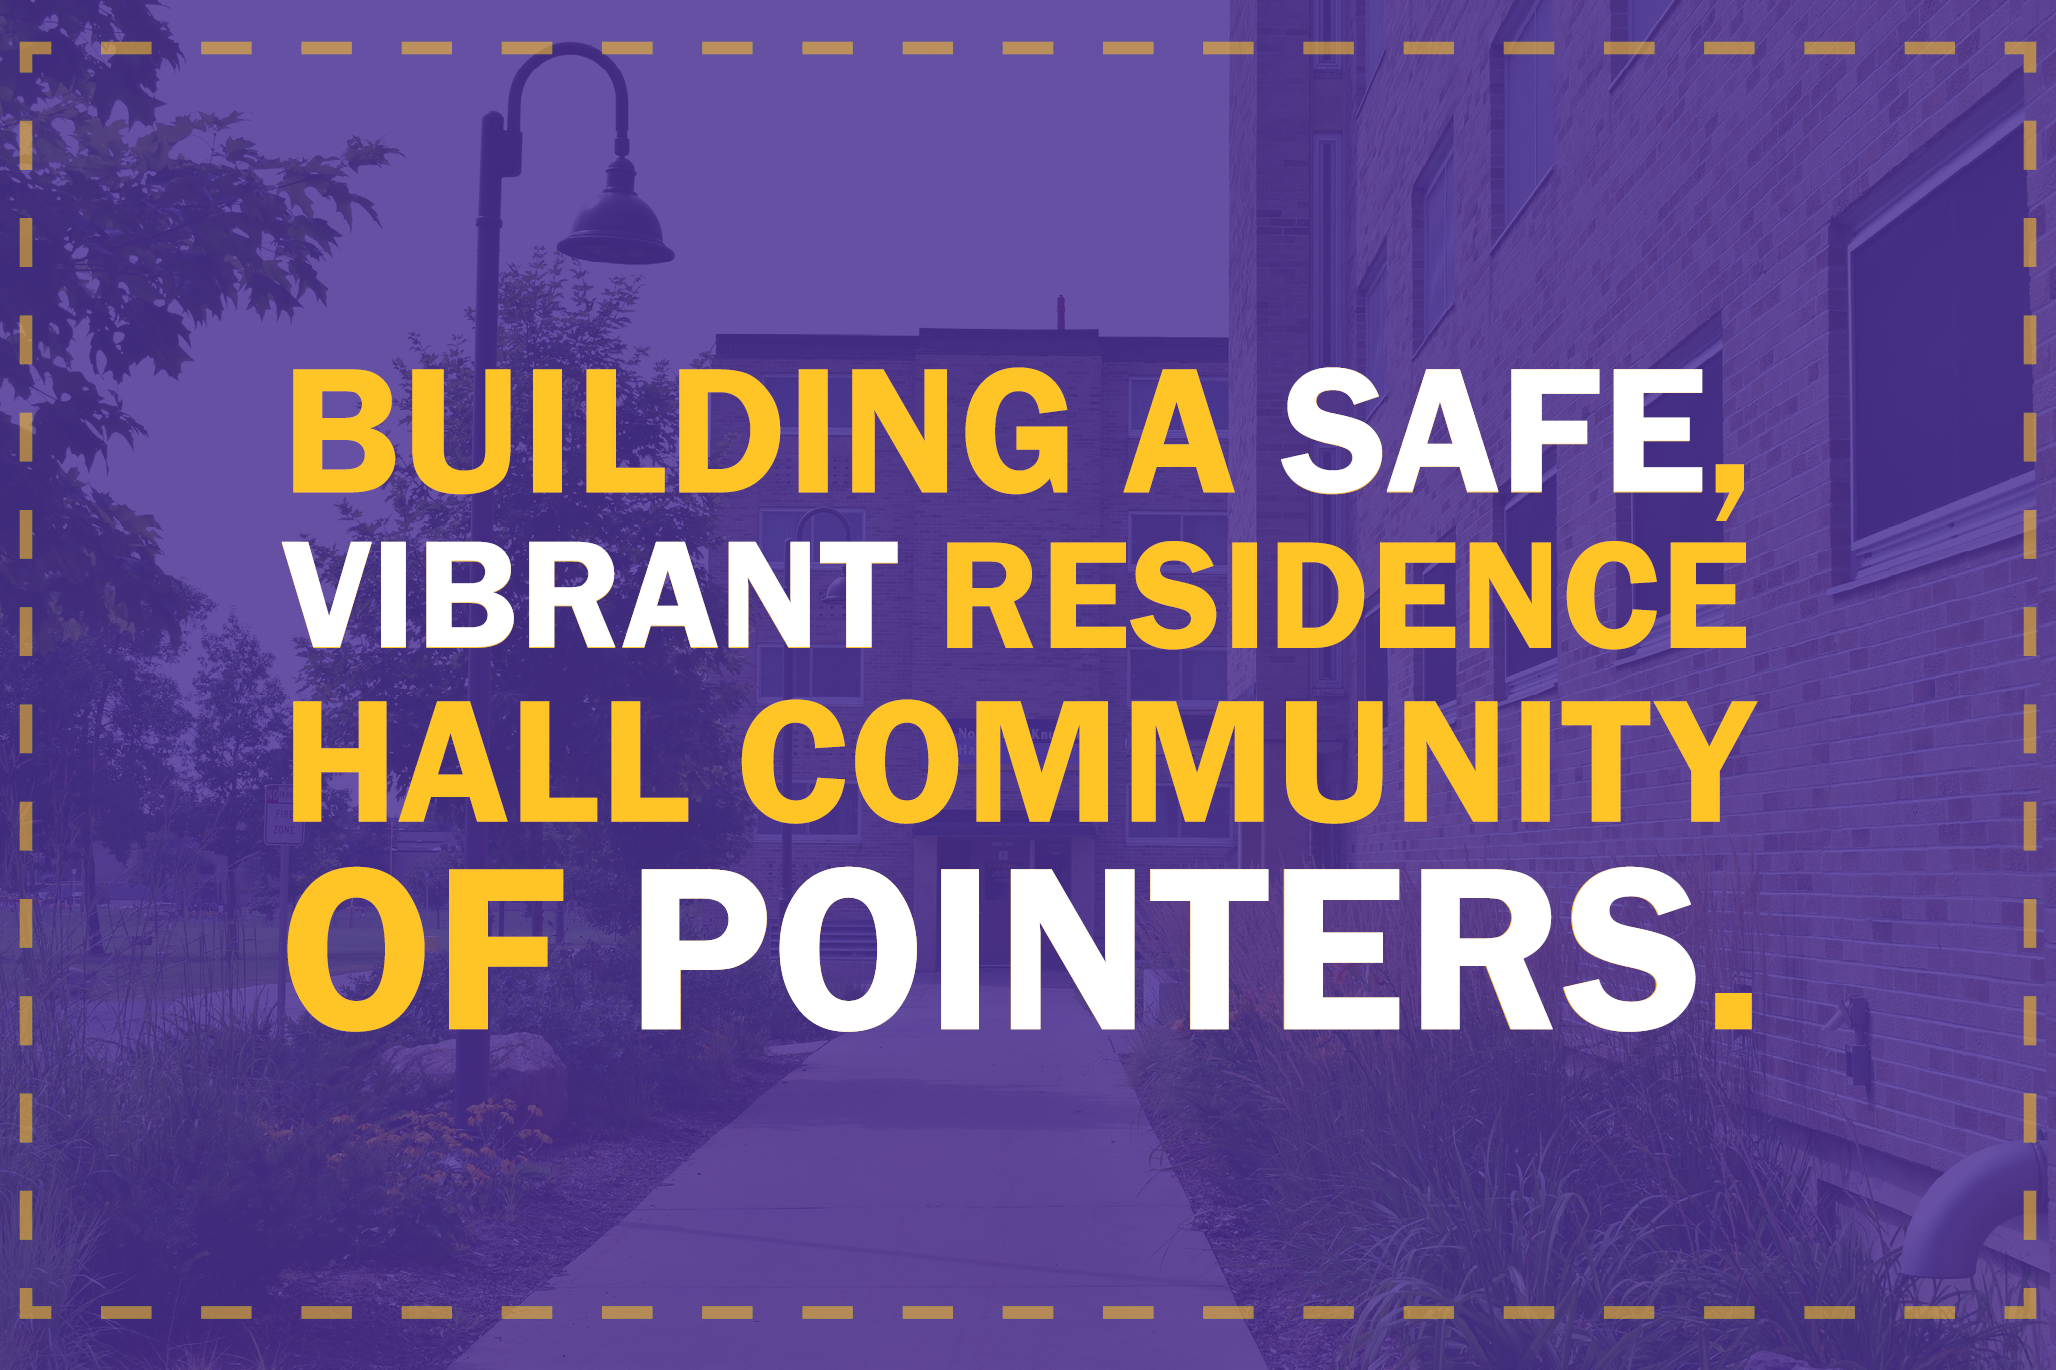 Building a Safe, Vibrant Residence Hall Community of Pointers